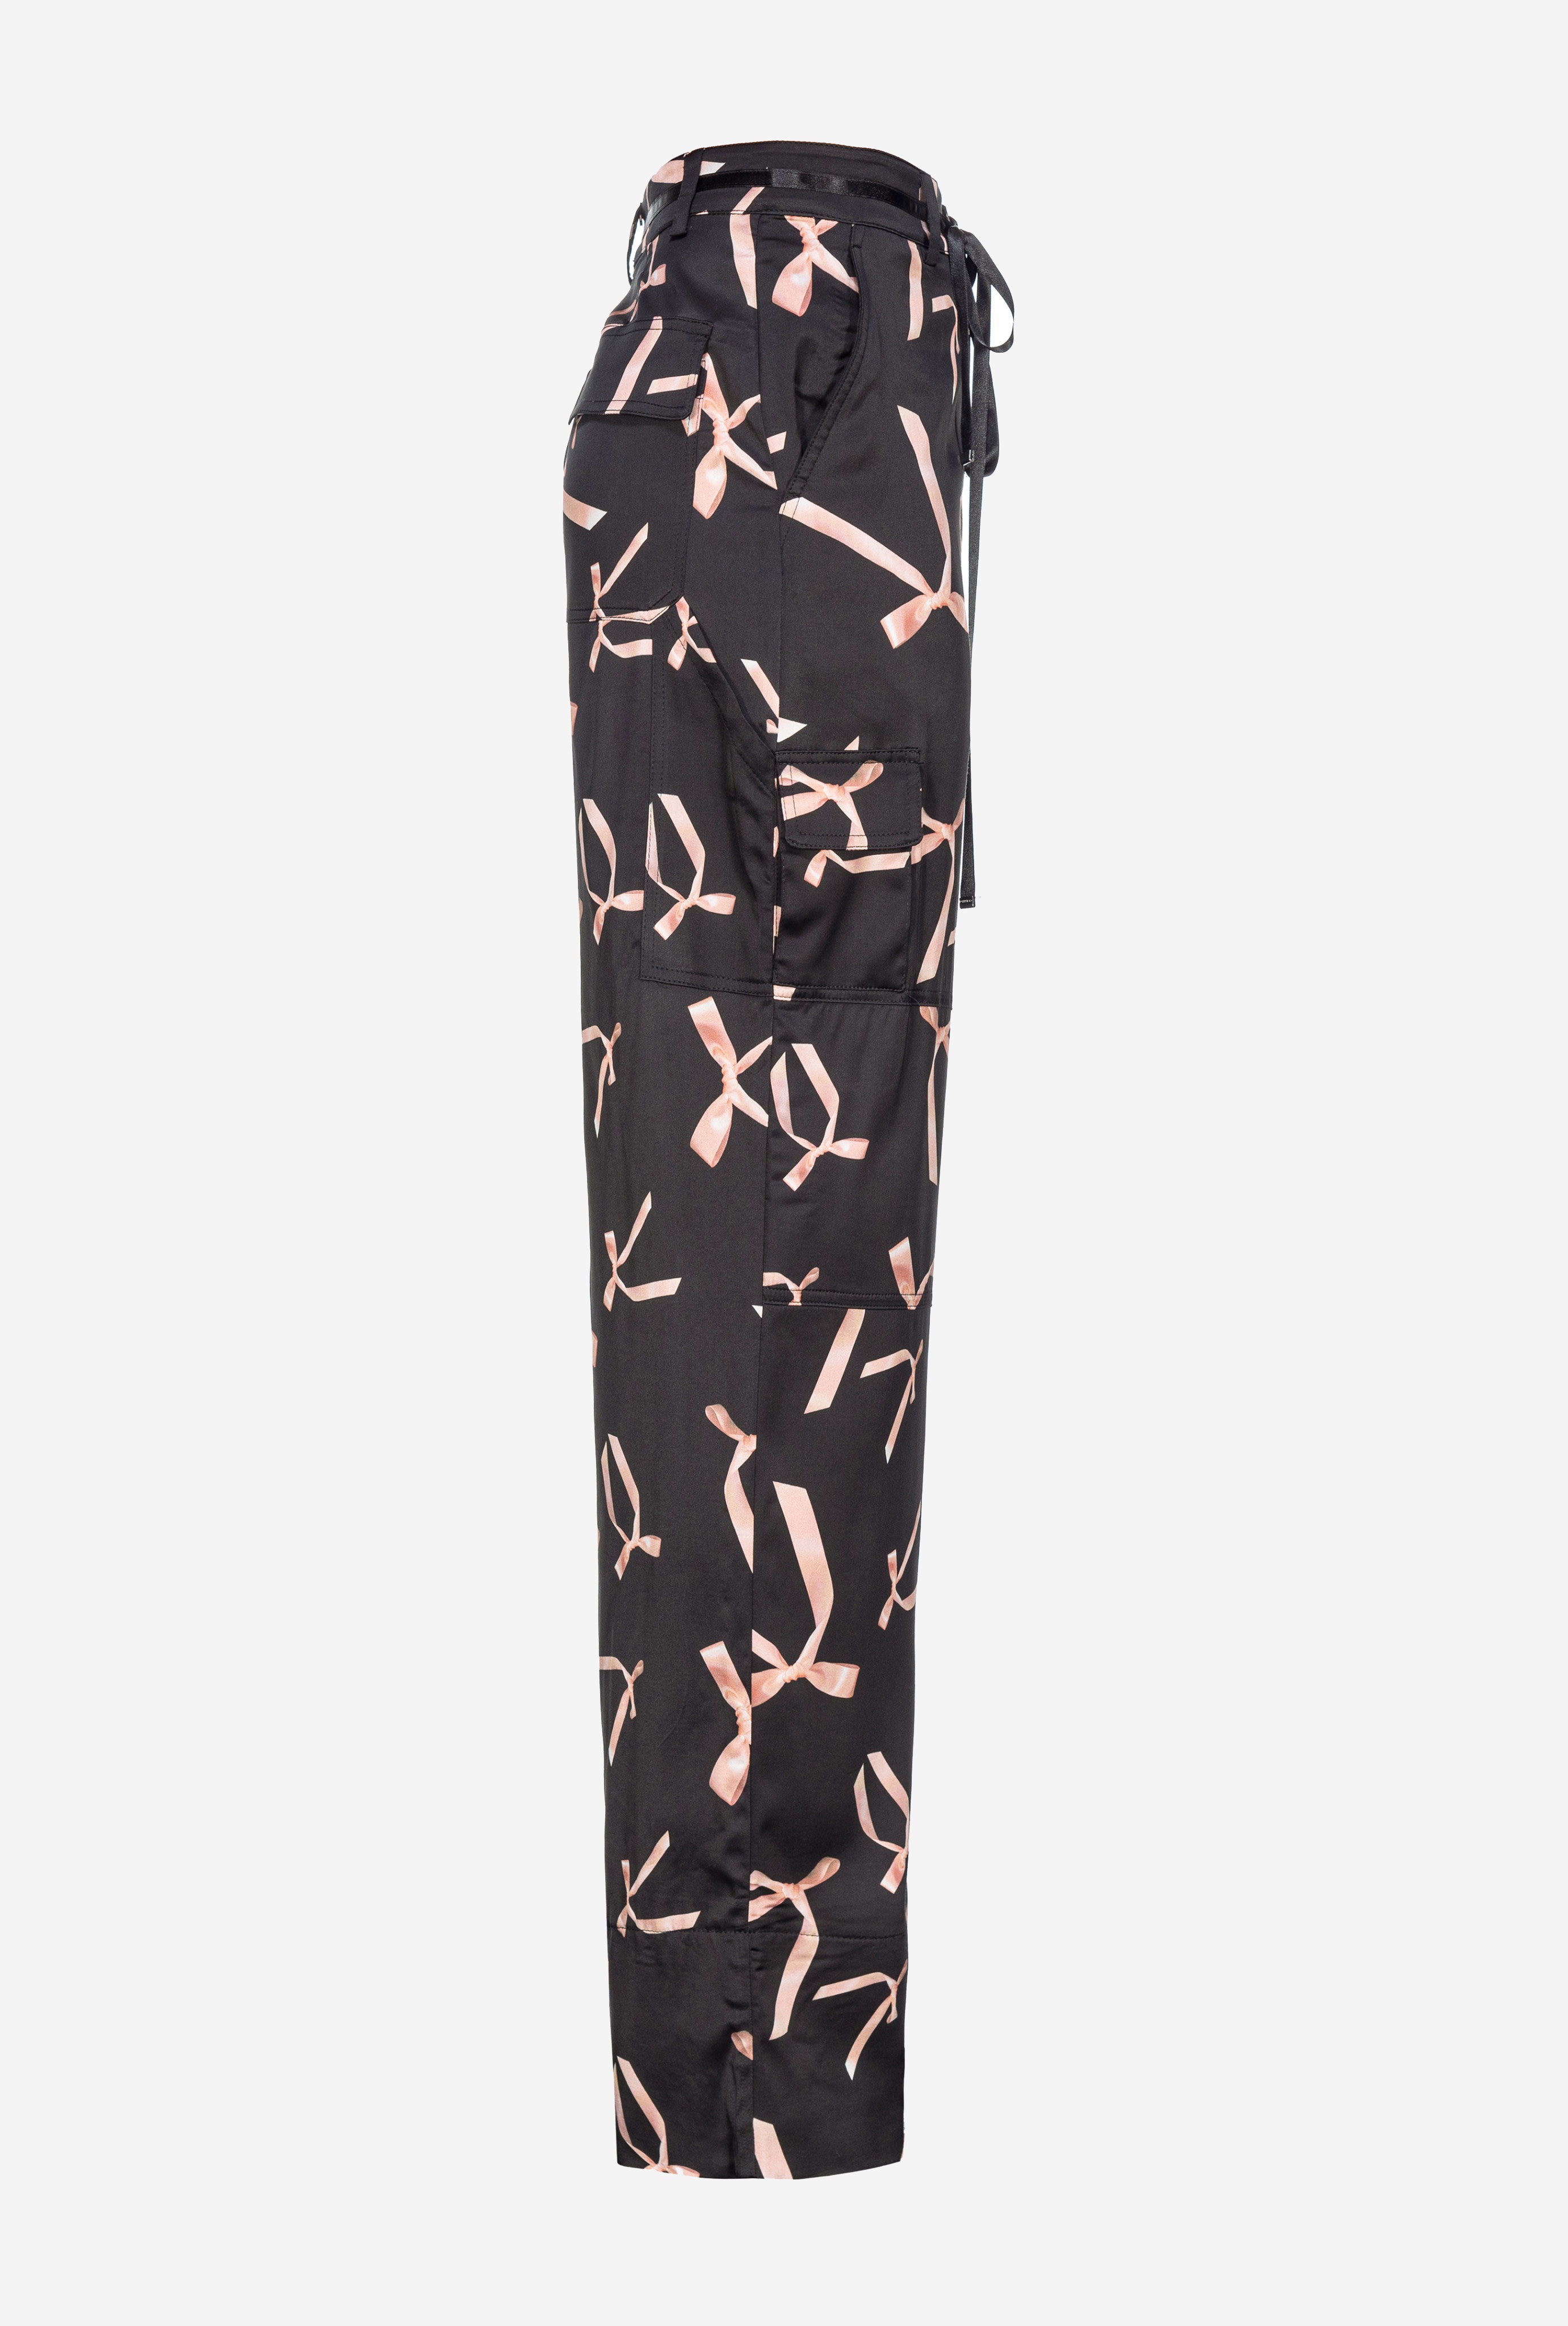 PINKO REIMAGINE BOW-PRINT CARGO TROUSERS BY PATRICK MCDOWELL - 5